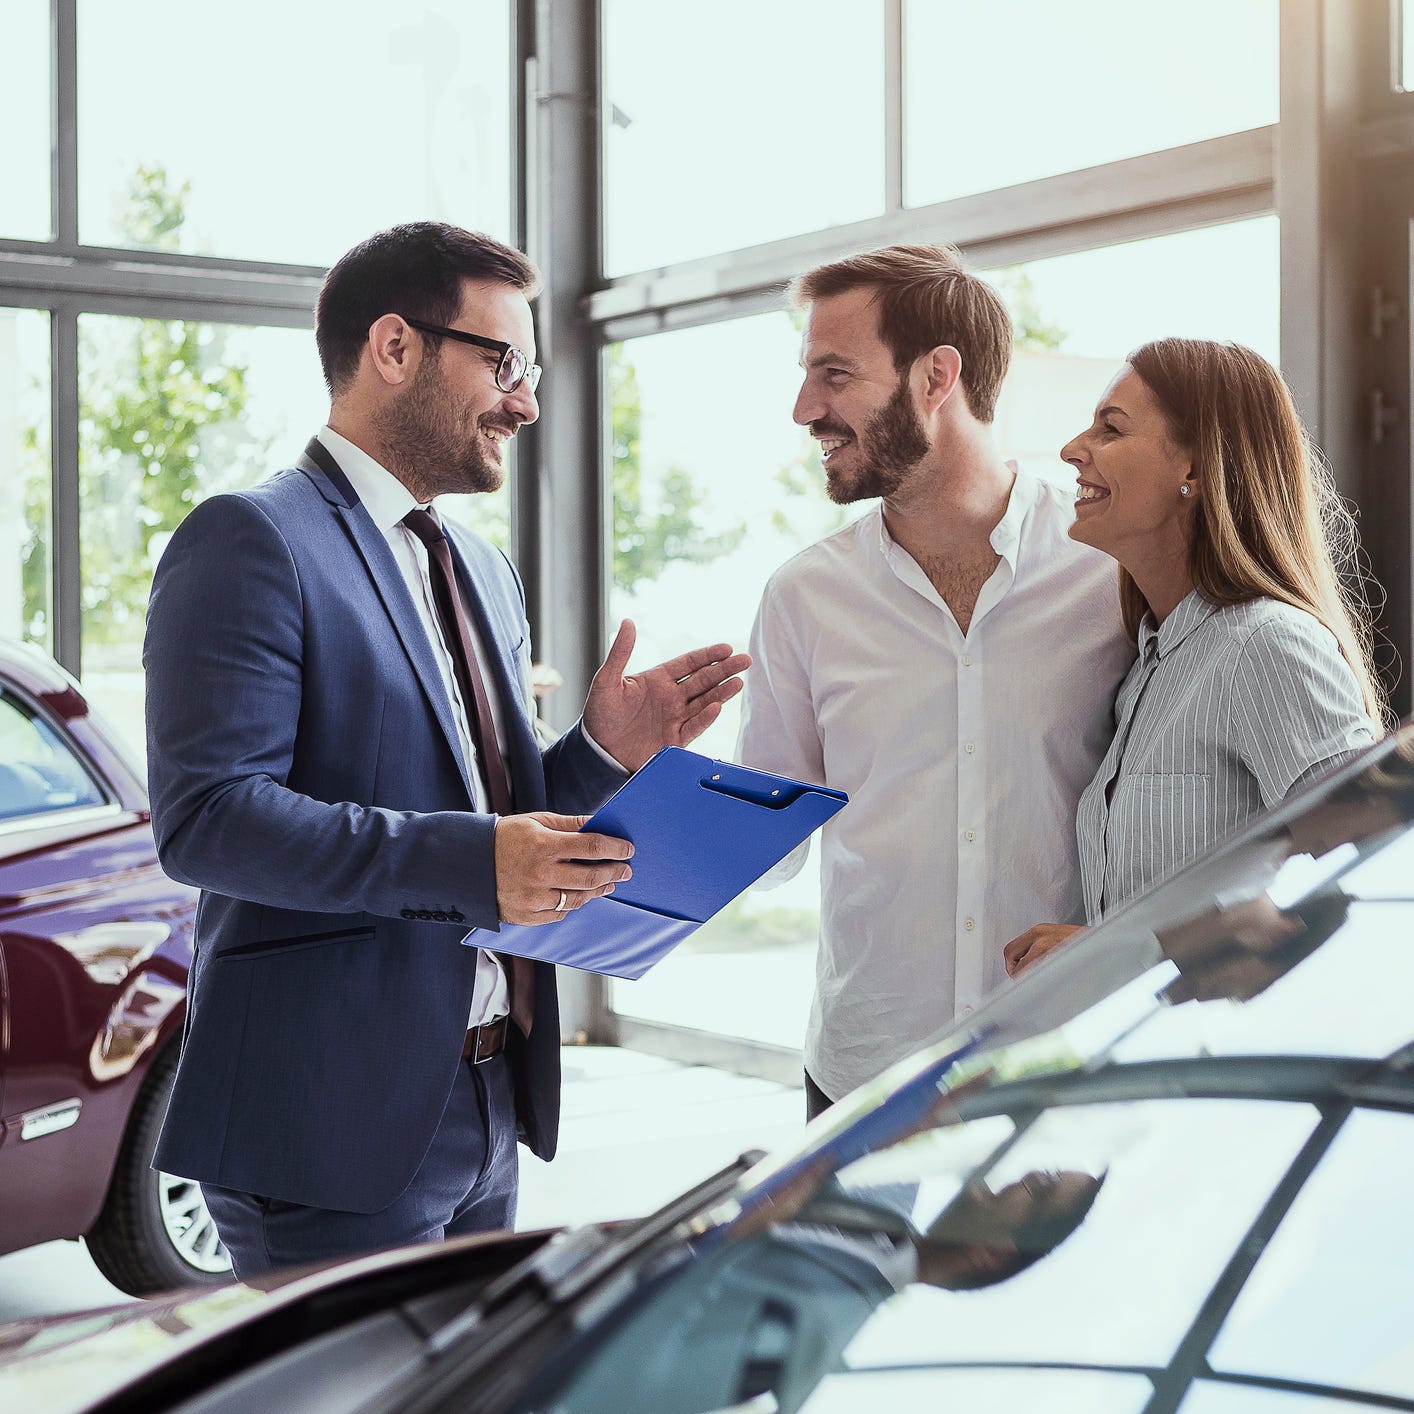 Thinking about buying a car? Save money buy shopping for a loan first.